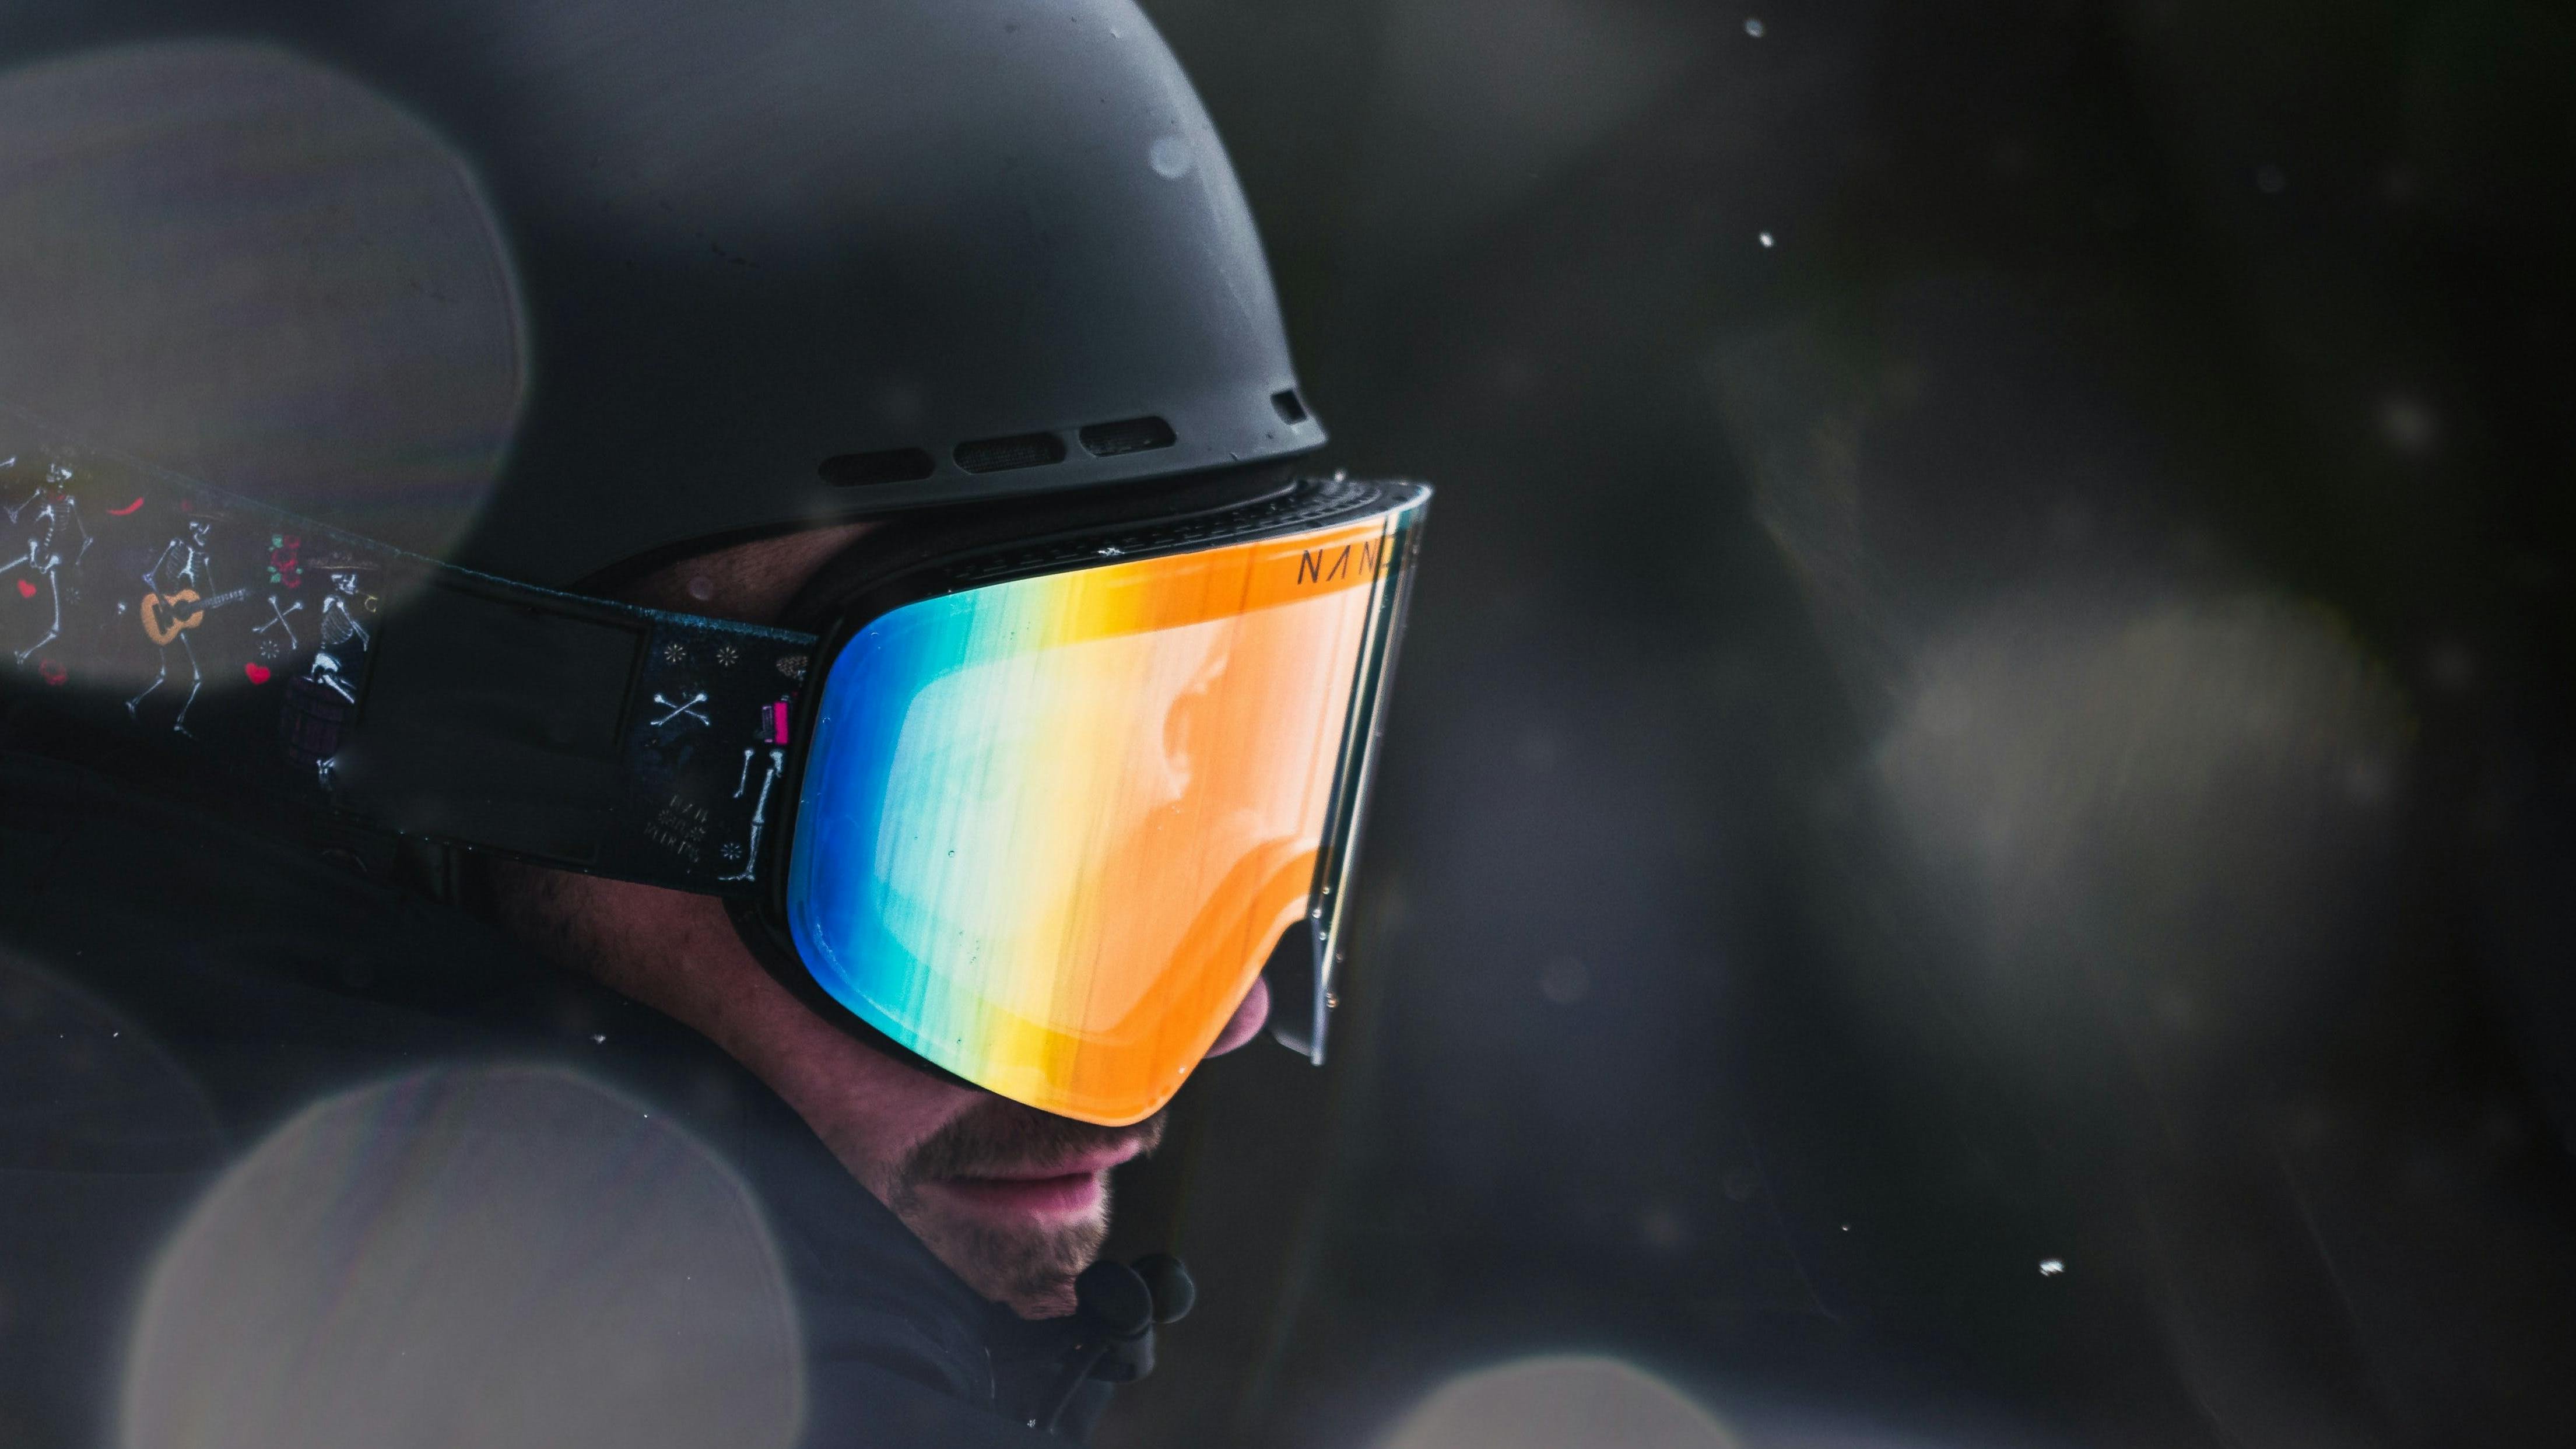 A skier or snowboarder wears a helmet and goggles while snow falls around them.